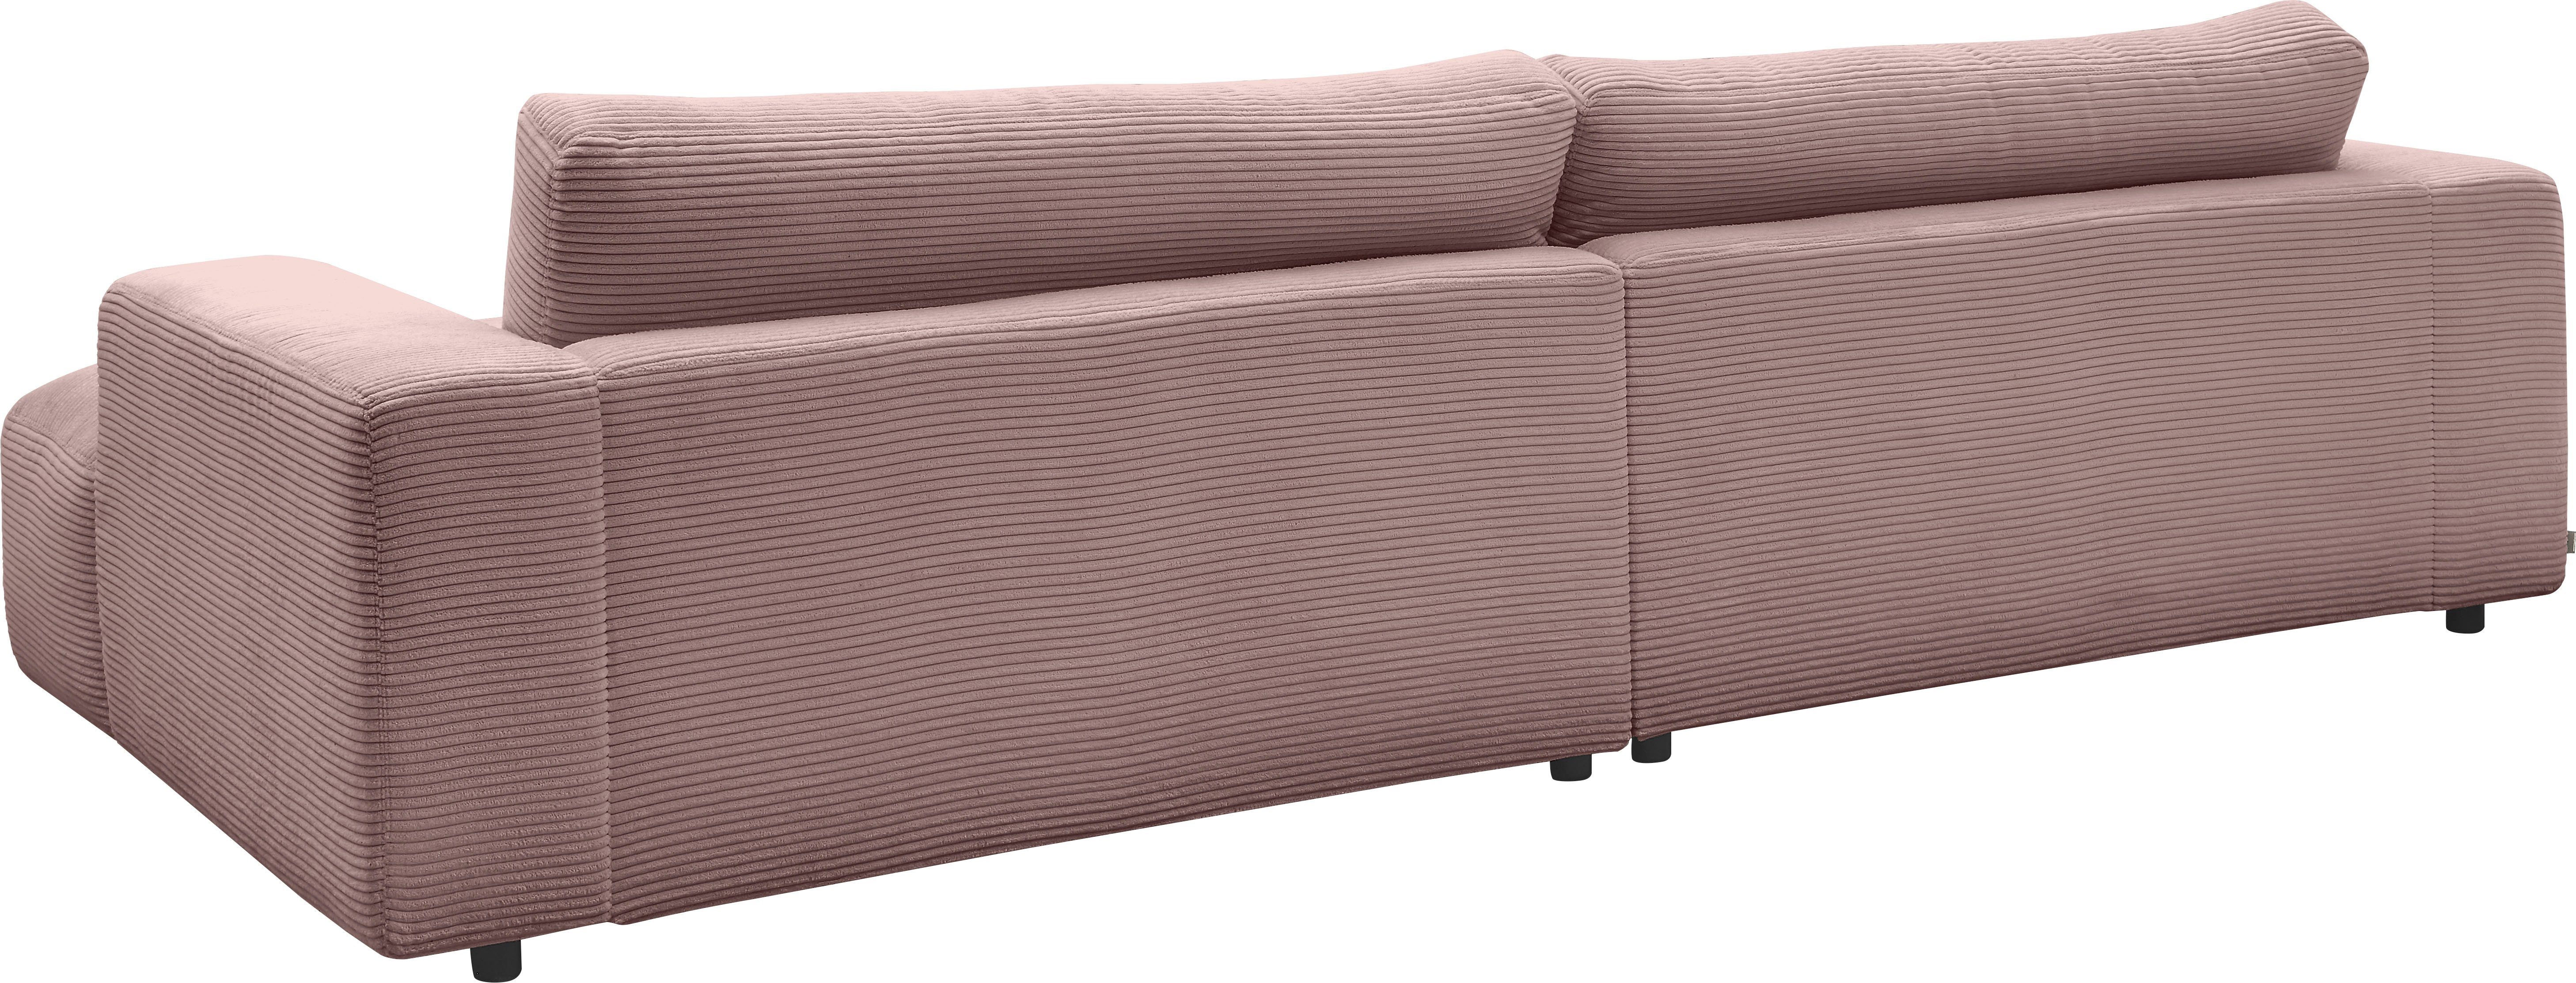 GALLERY M branded by 292 Lucia, cm Musterring Loungesofa rosa Breite Cord-Bezug